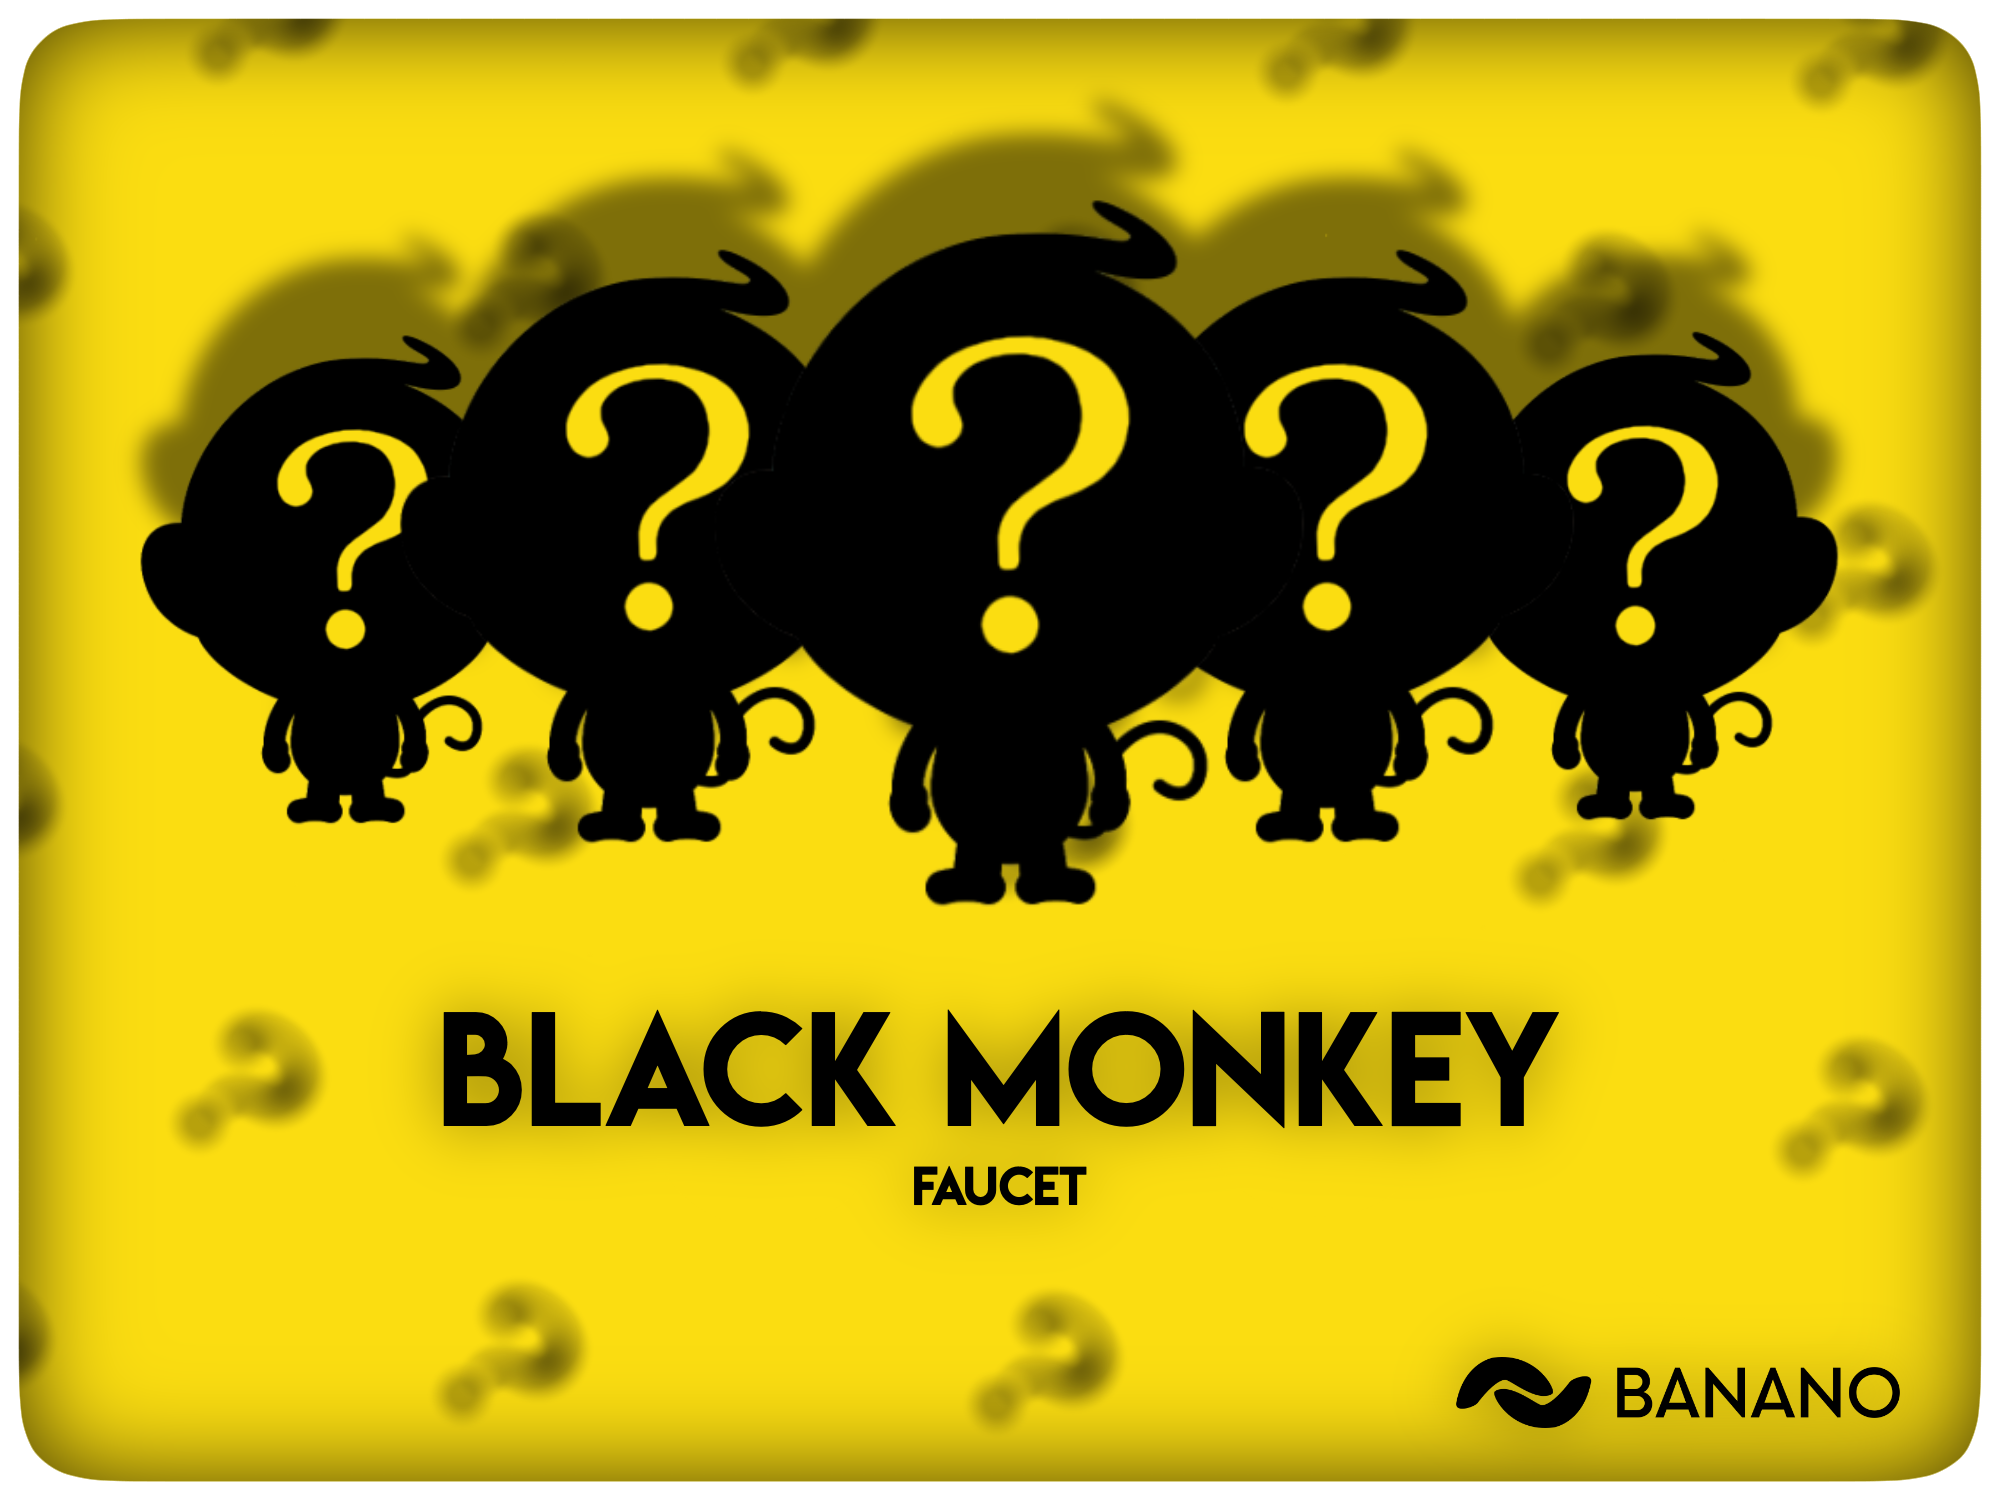 24 Hours Only; BANANO Faucet Game ‘Black Monkey’ Round 15 Starts this Sunday!